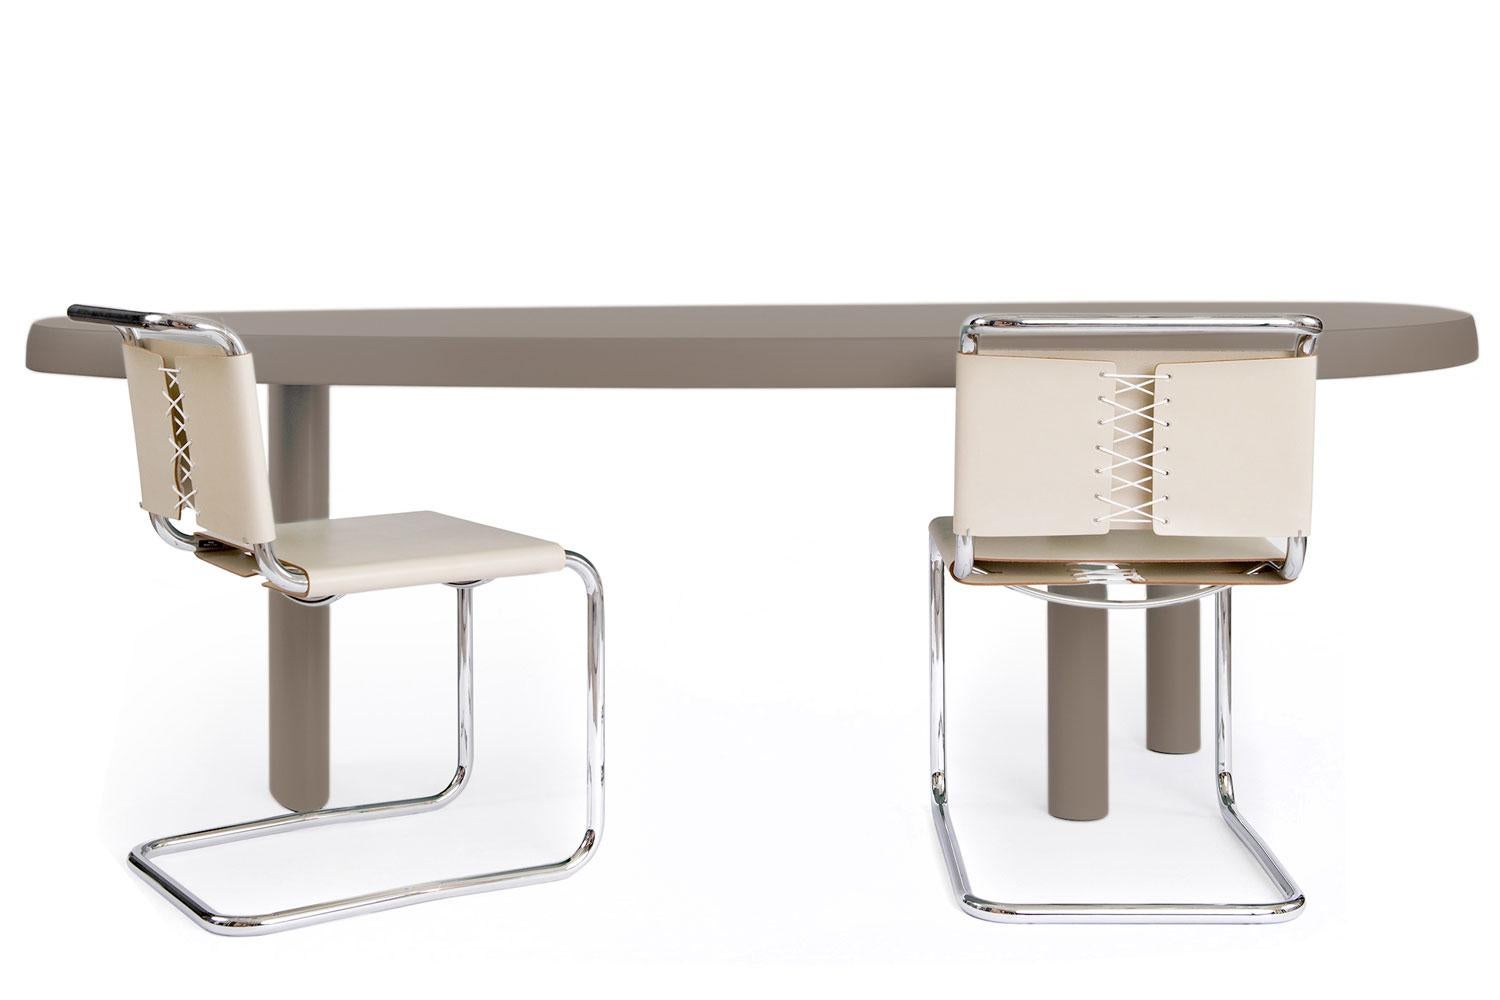 Table En Forme Libre by Cassina

A design table with soft, enveloping organic shapes, re-visited by Cassina in a new dining size, easily adapted to different spaces and furnishing styles; seats up to 8 people. The table has three legs: one is oval